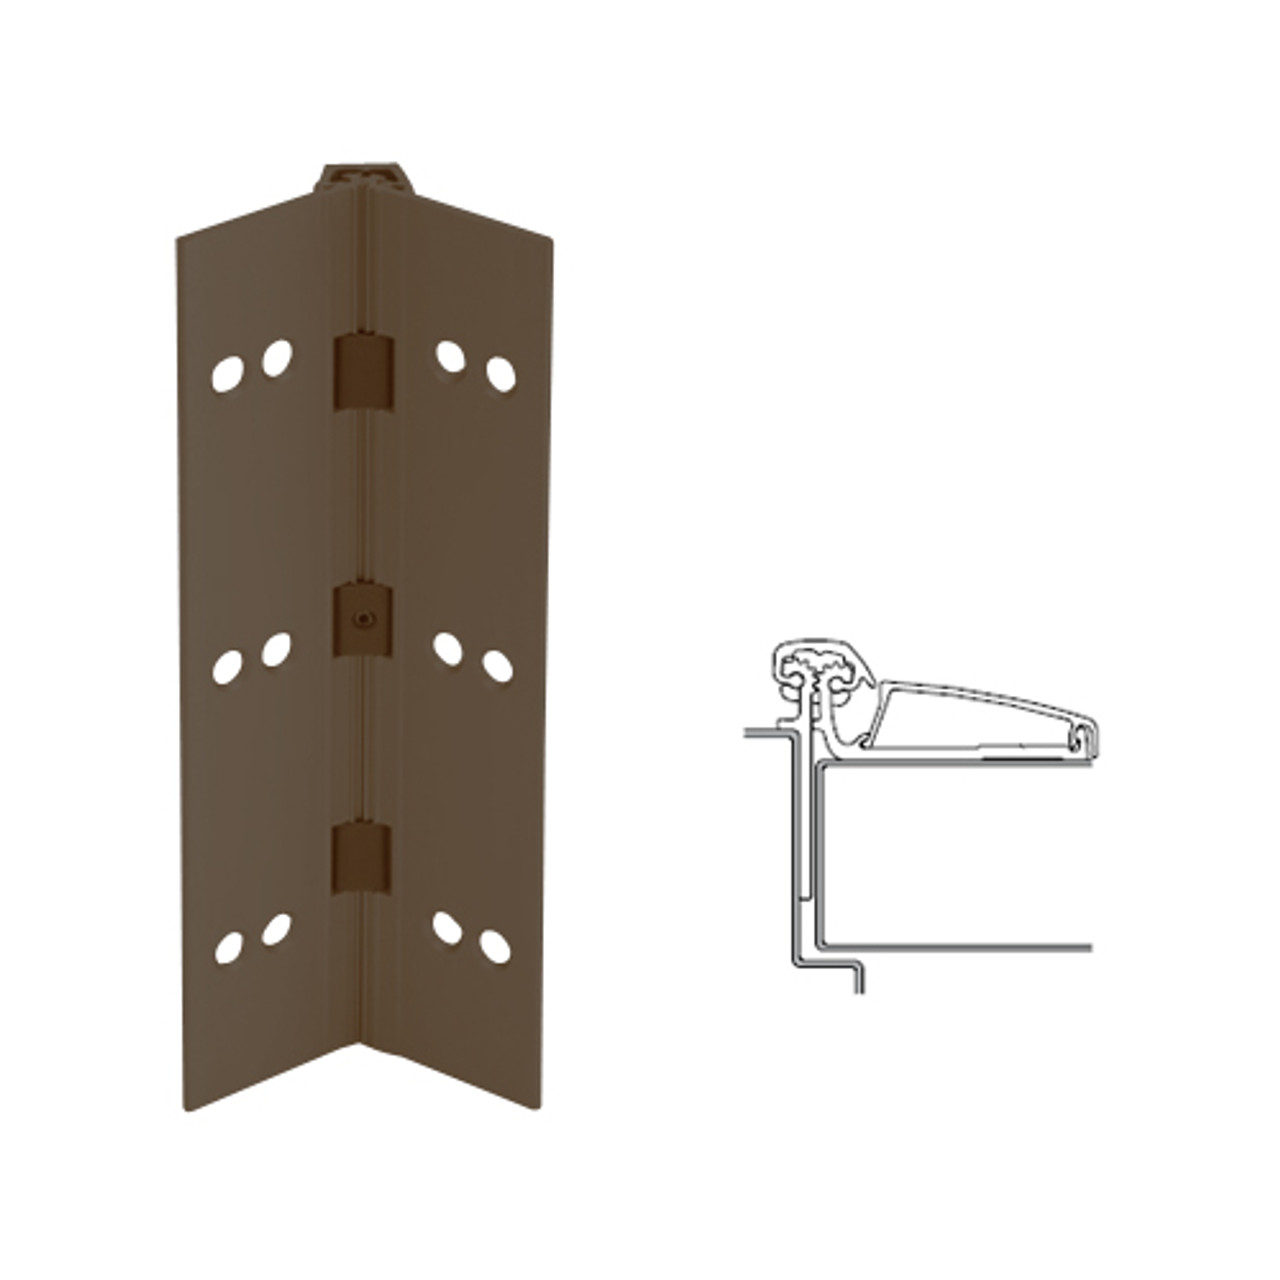 045XY-313AN-95-WD IVES Adjustable Half Surface Continuous Geared Hinges with Wood Screws in Dark Bronze Anodized